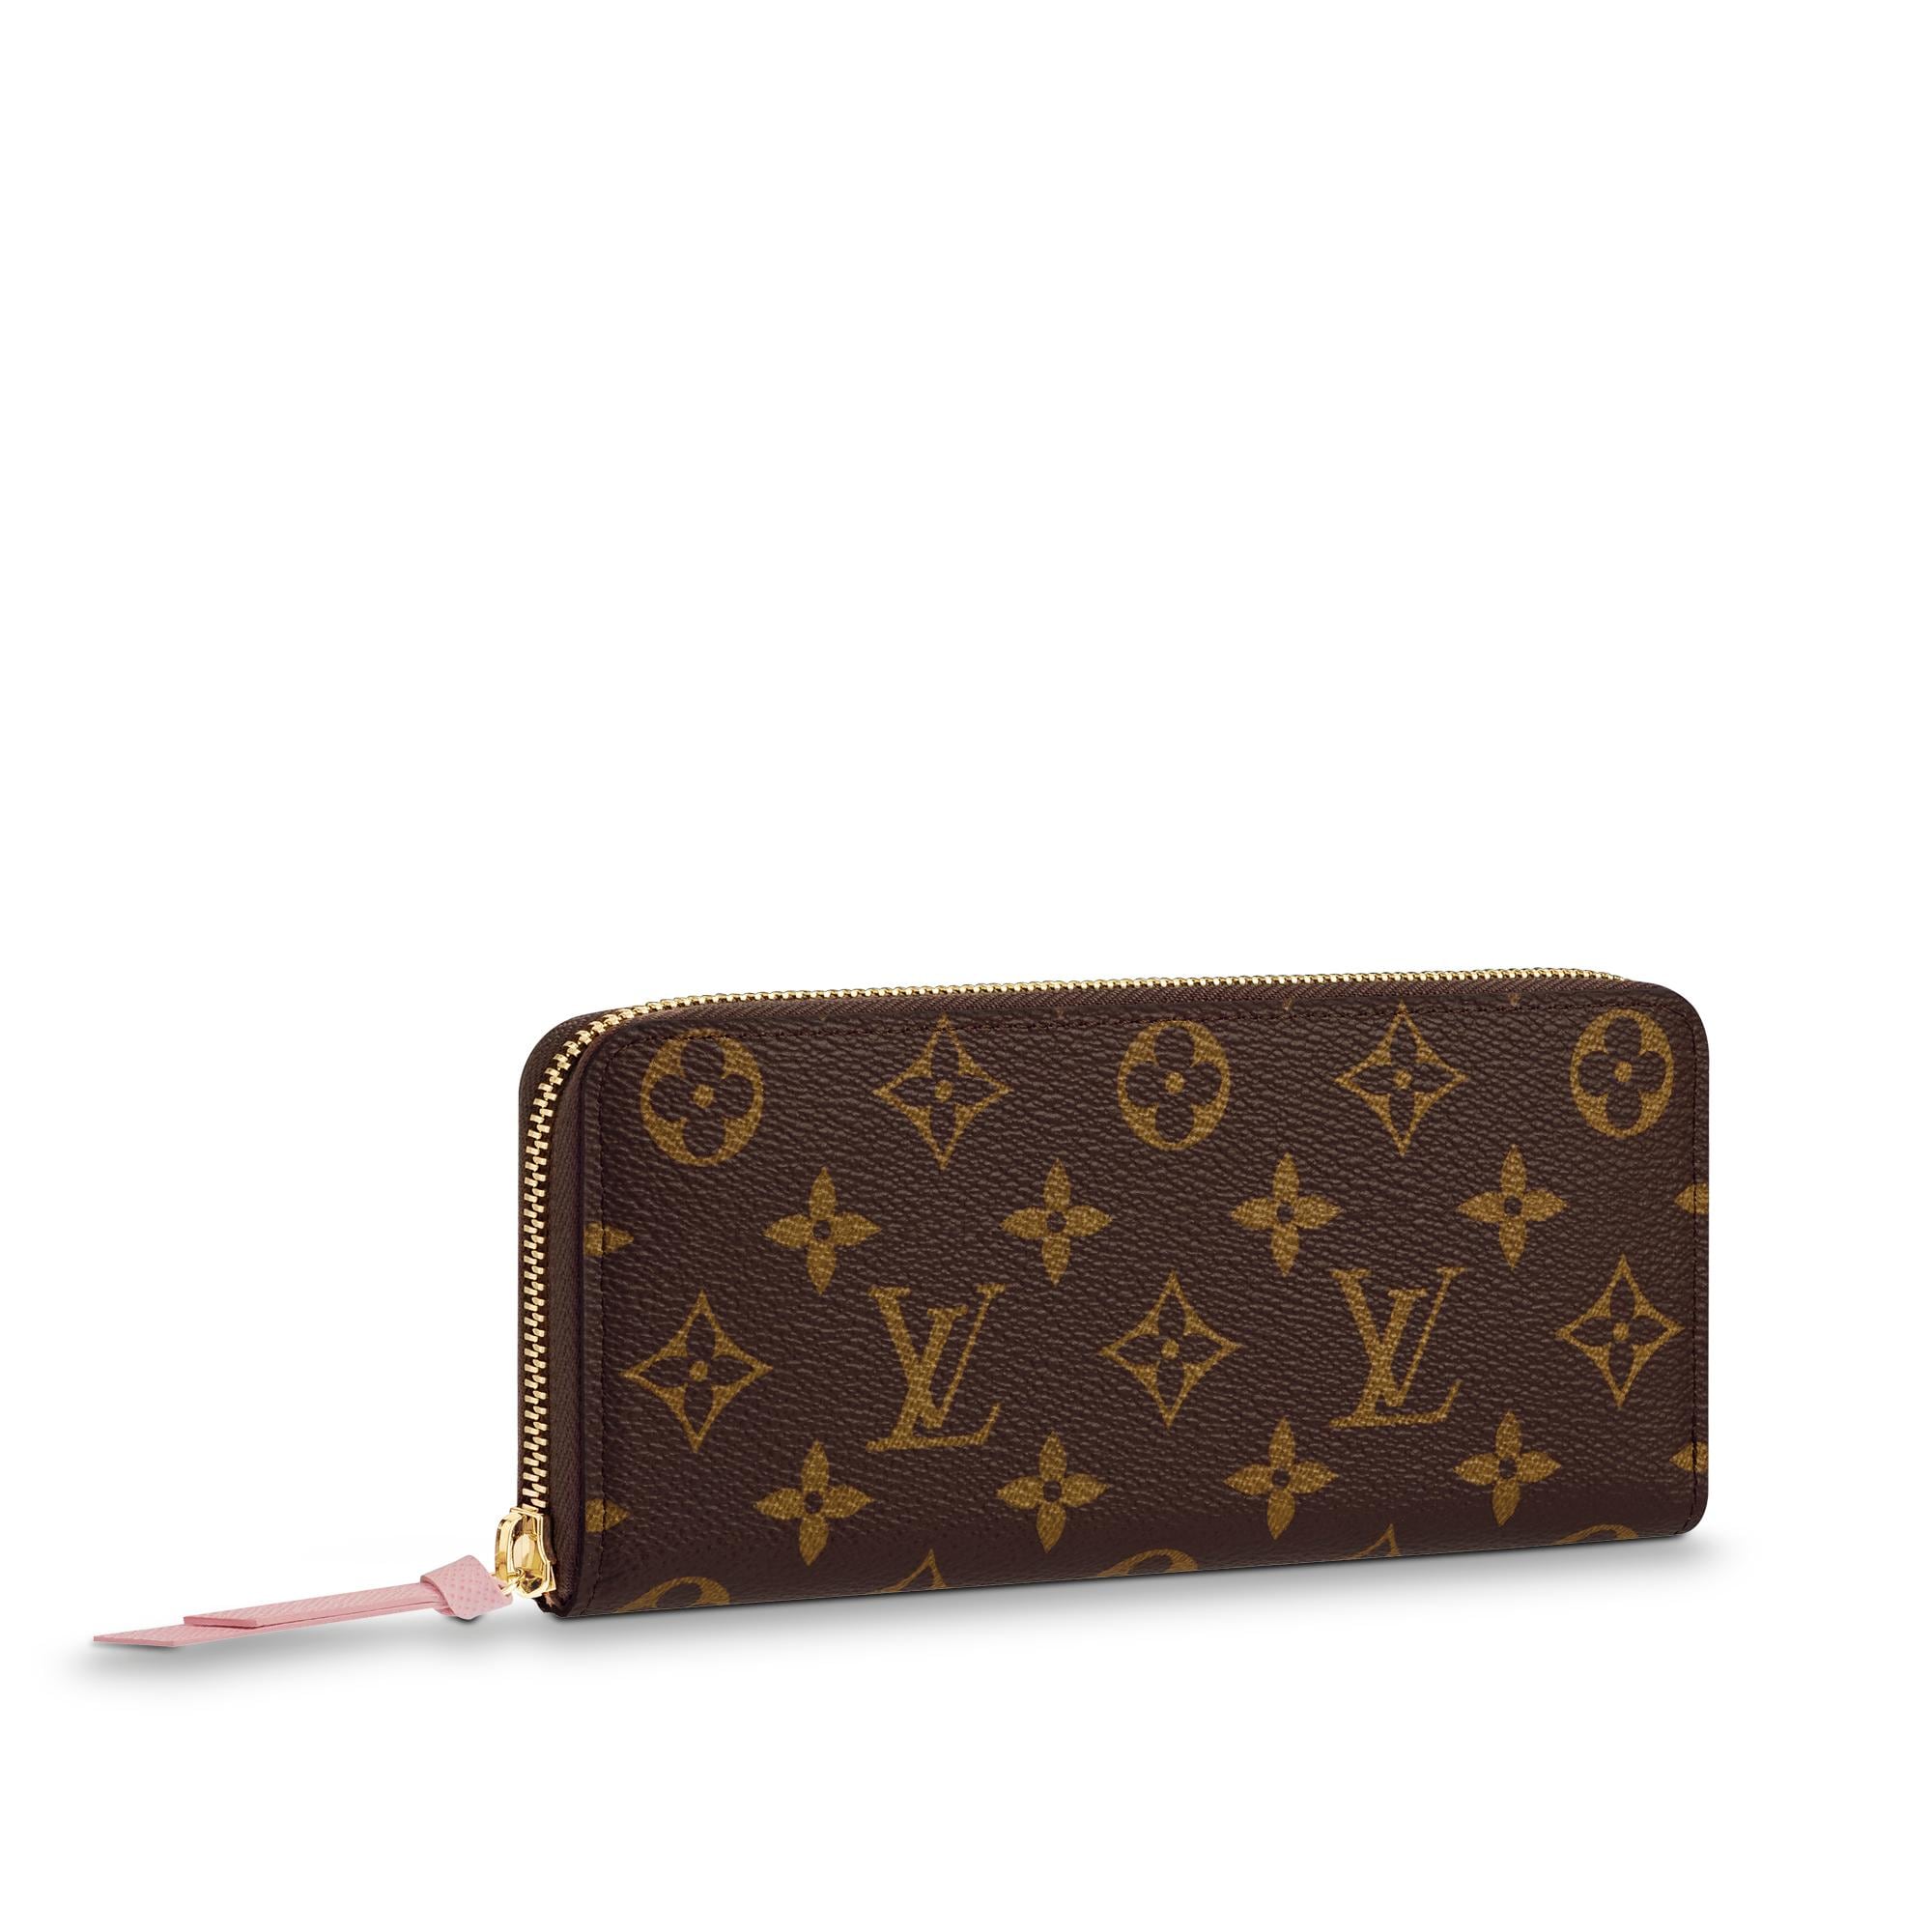 Louis Vuitton Clemence Wallet in Monogram, Colored Leather Zip M61298 Rose Ballerine